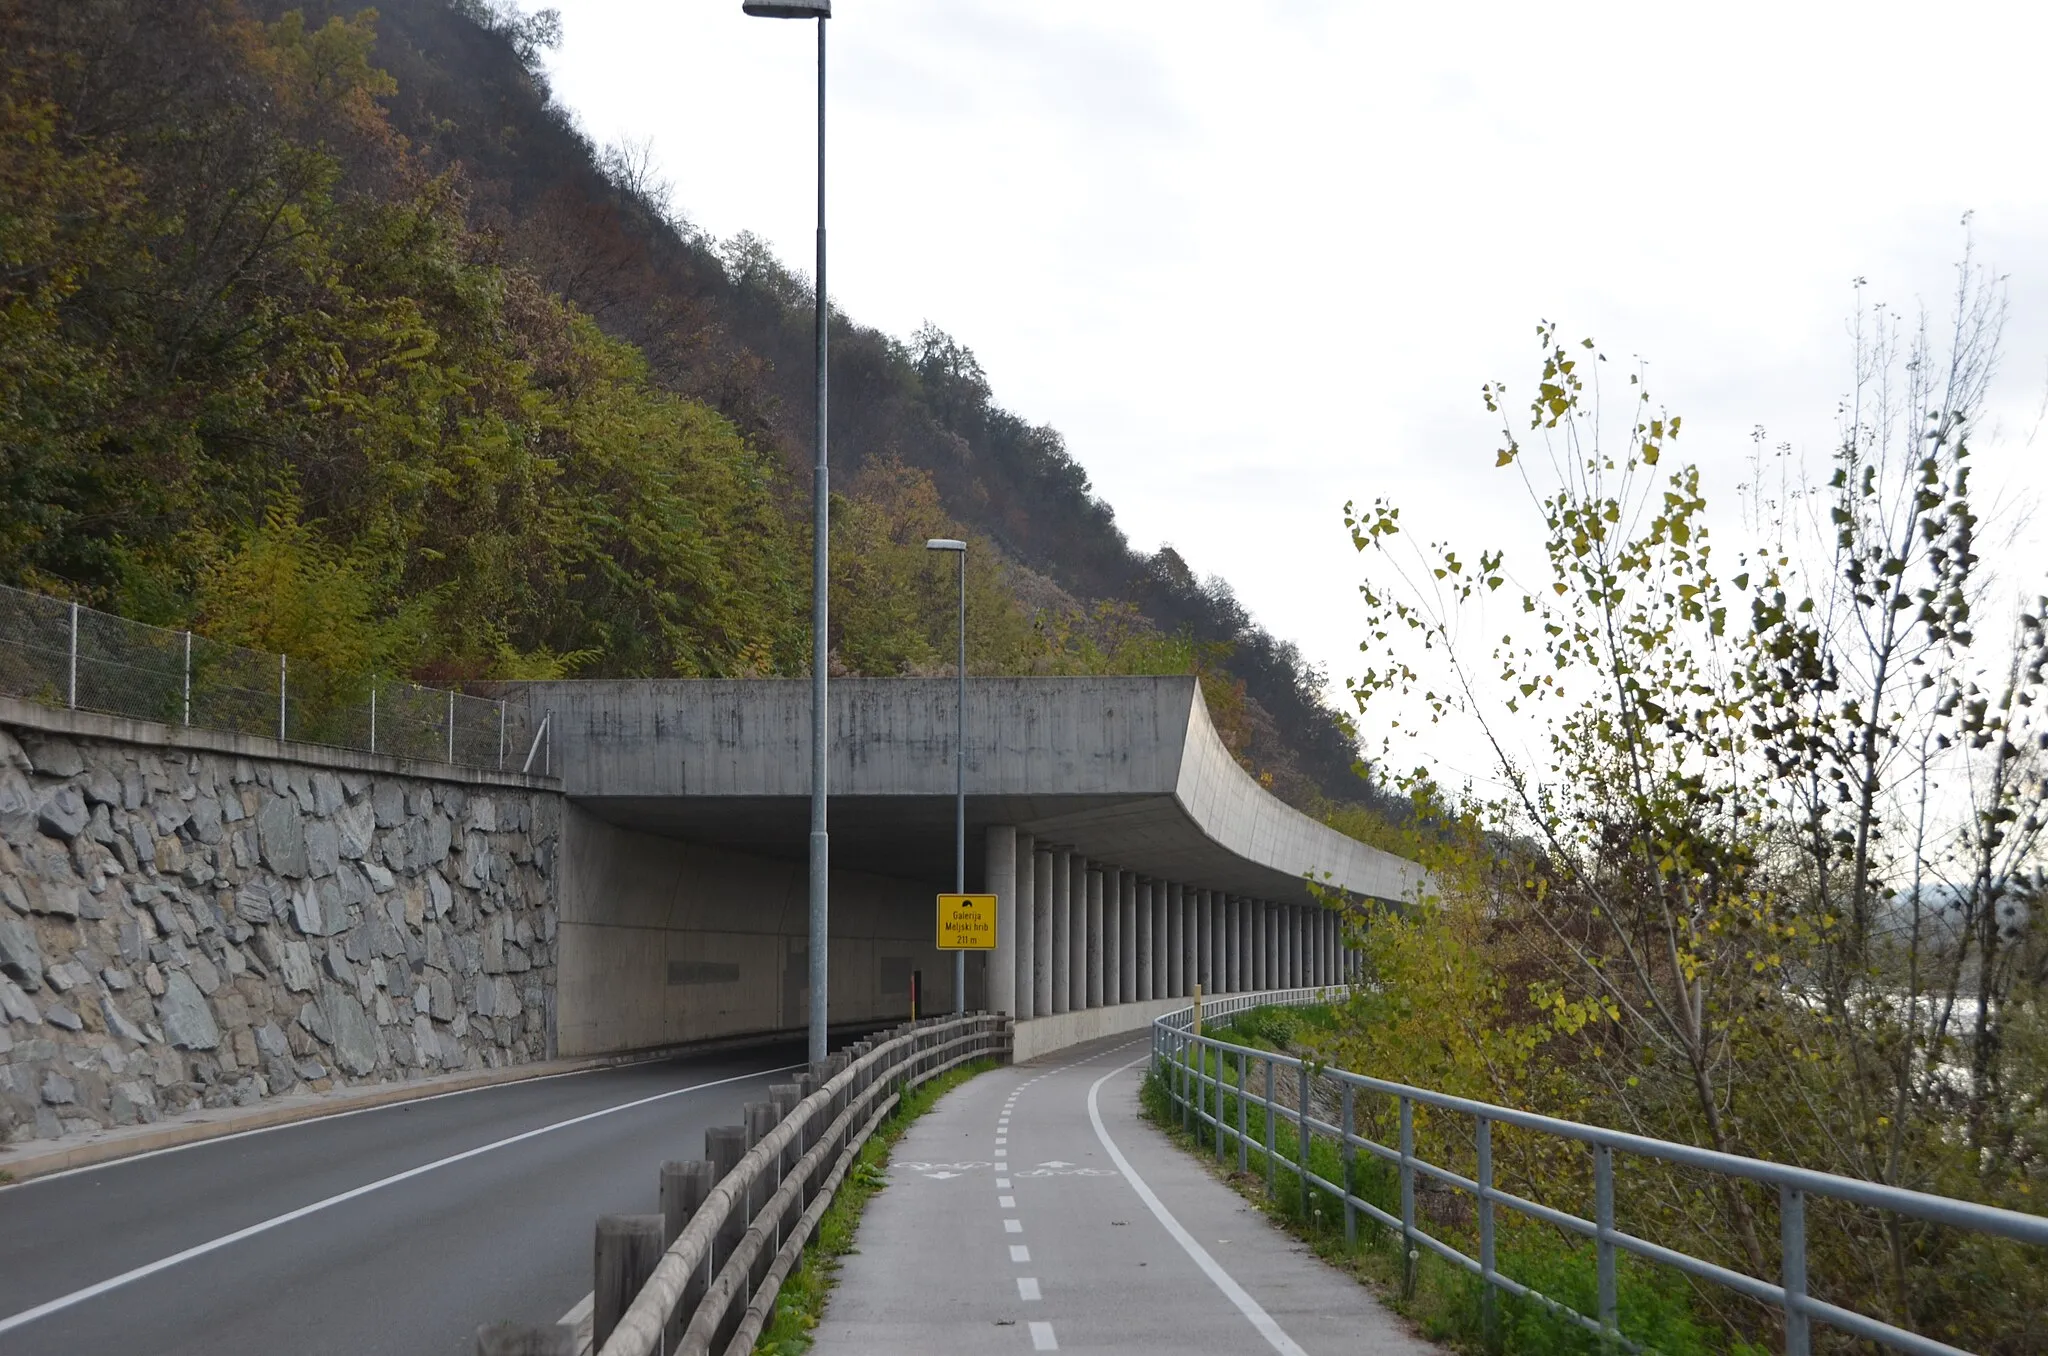 Photo showing: Gallery Meljski hrib (2012) protects the main road and area for cyclists and pedestrians from falling rocks from unstable hillsides above.